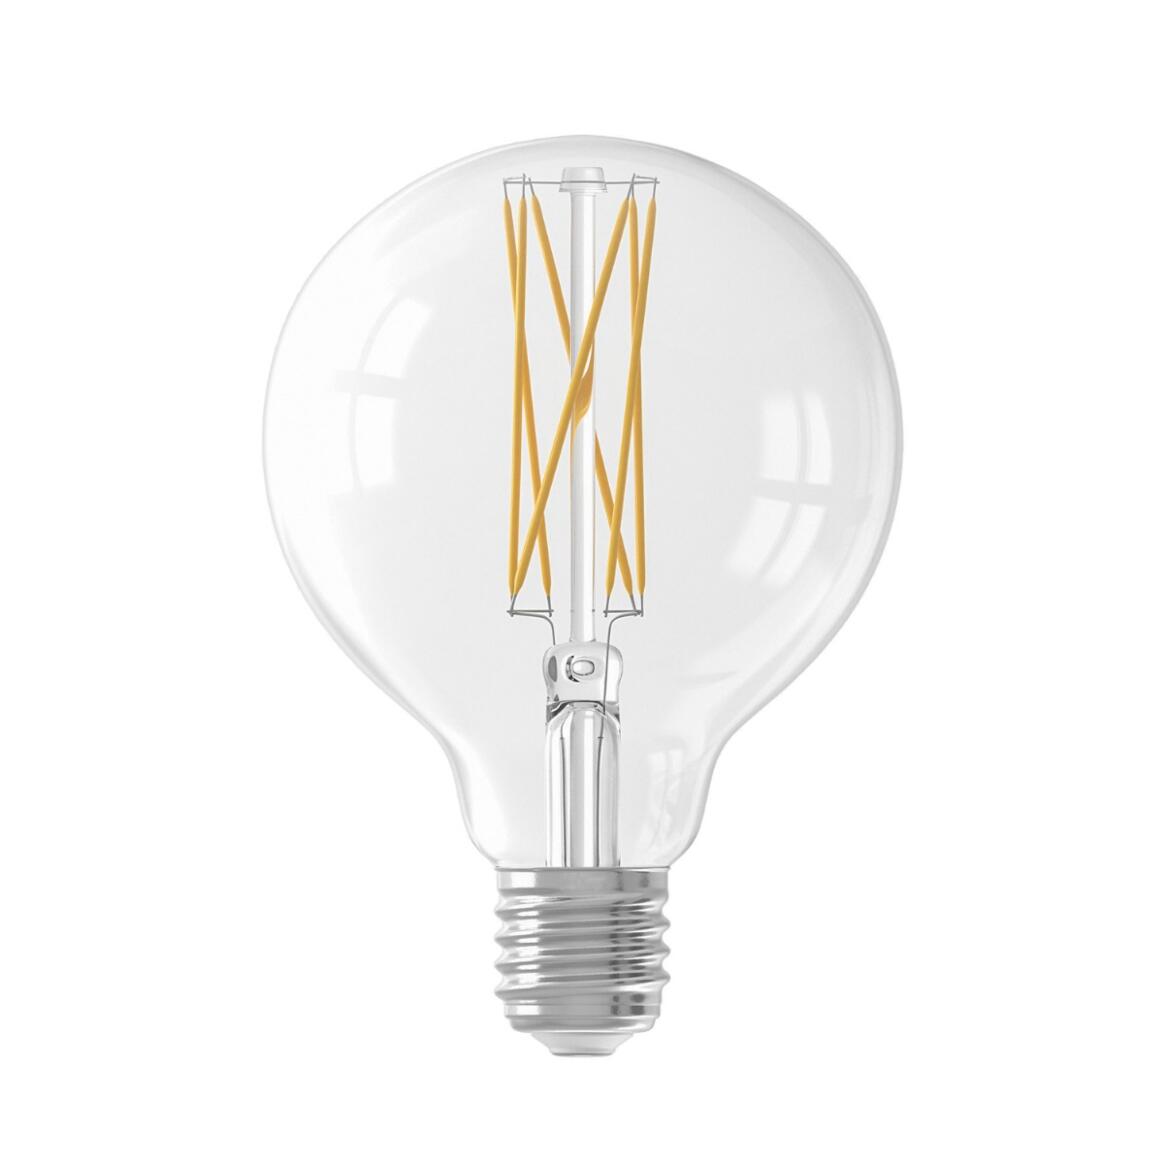 LED XL Round Filament Bulb Dimmable E27 4.5W 2300k 470lm 9.5cm main product image